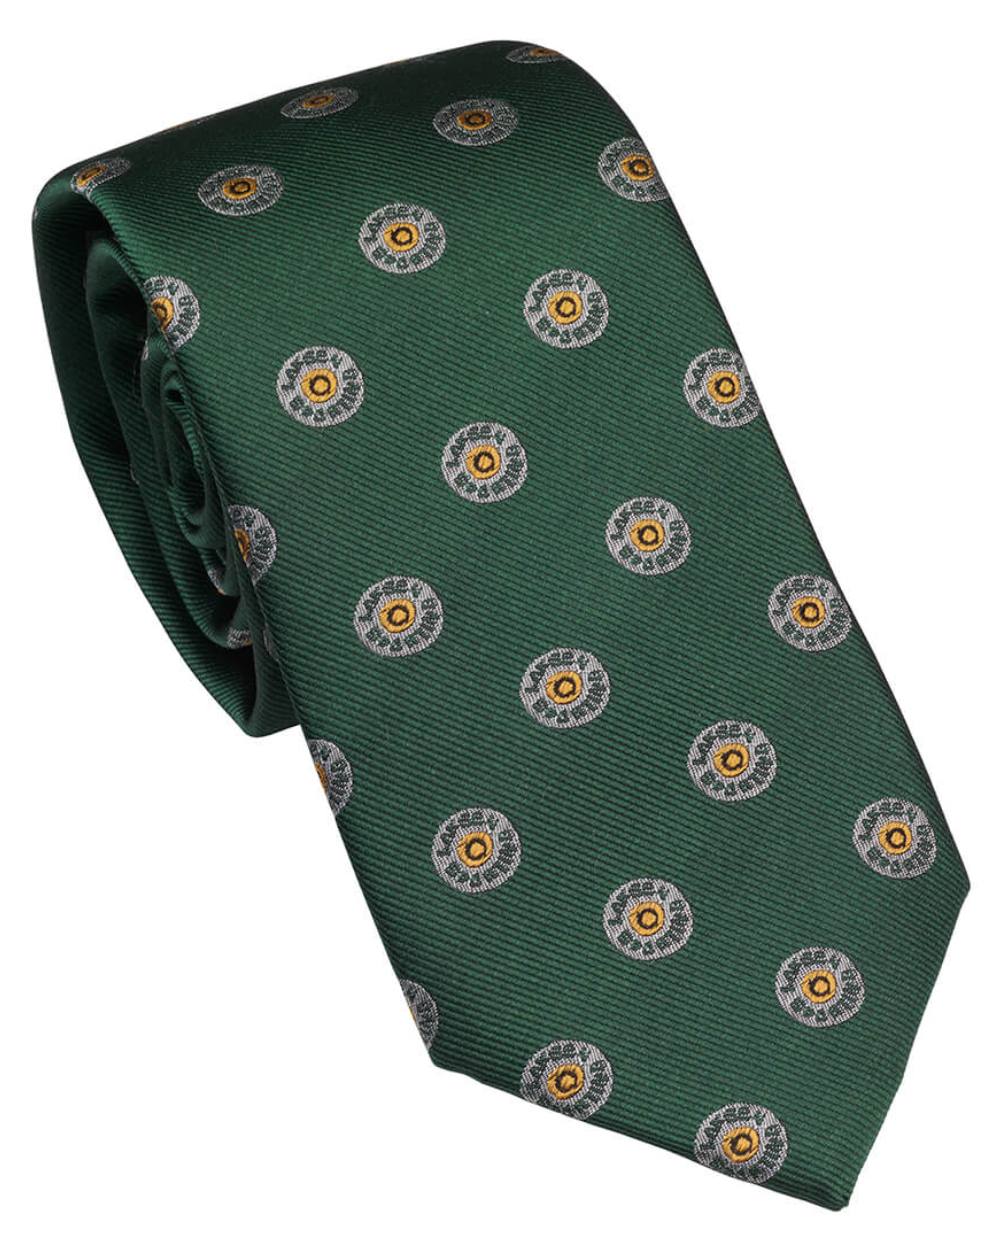 British Racing Green Coloured Laksen Cartridge Cap Tie On A White Background 